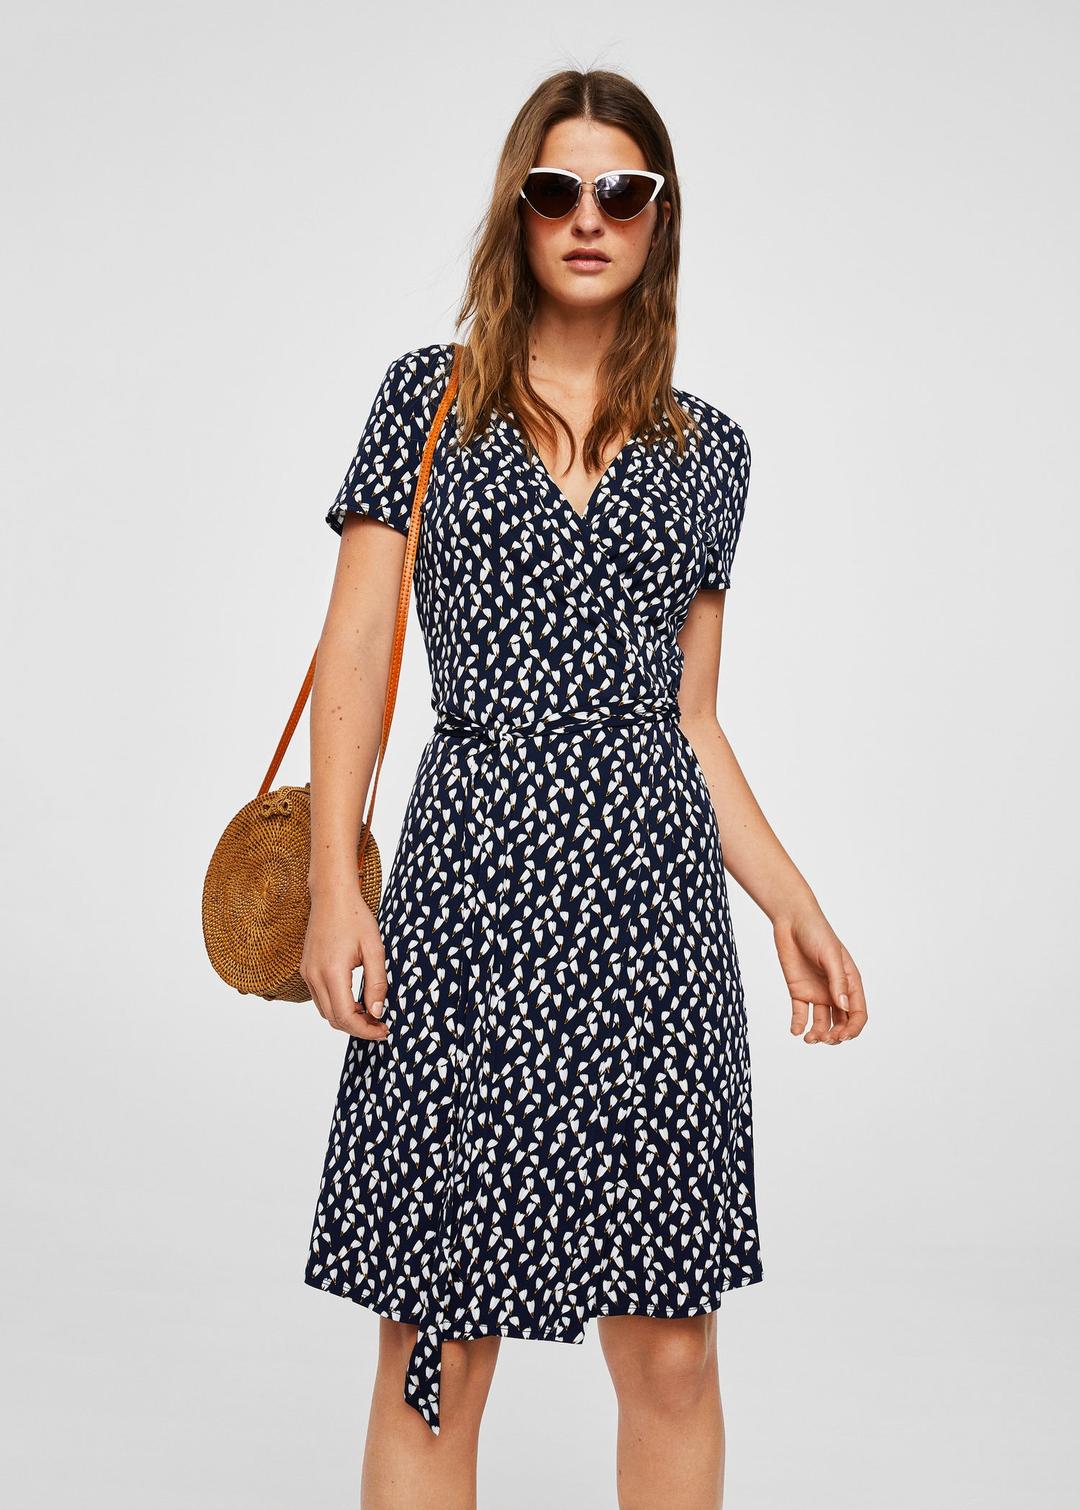 These Work Dresses Mean Business (But They're Cute Too) | Who What Wear UK